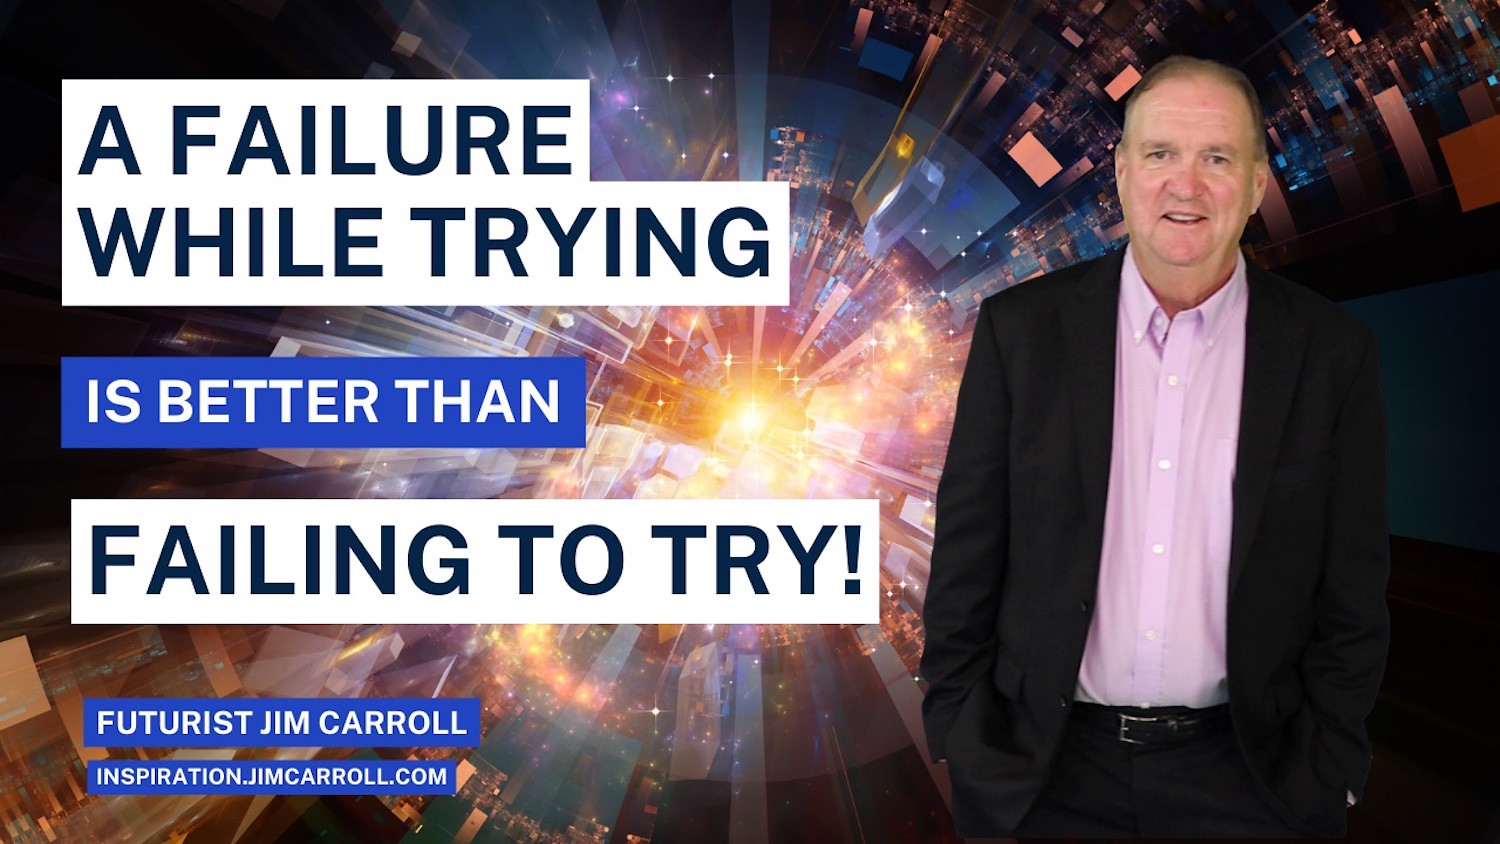 "A failure while trying is better than failing to try!" - Futurist Jim Carroll